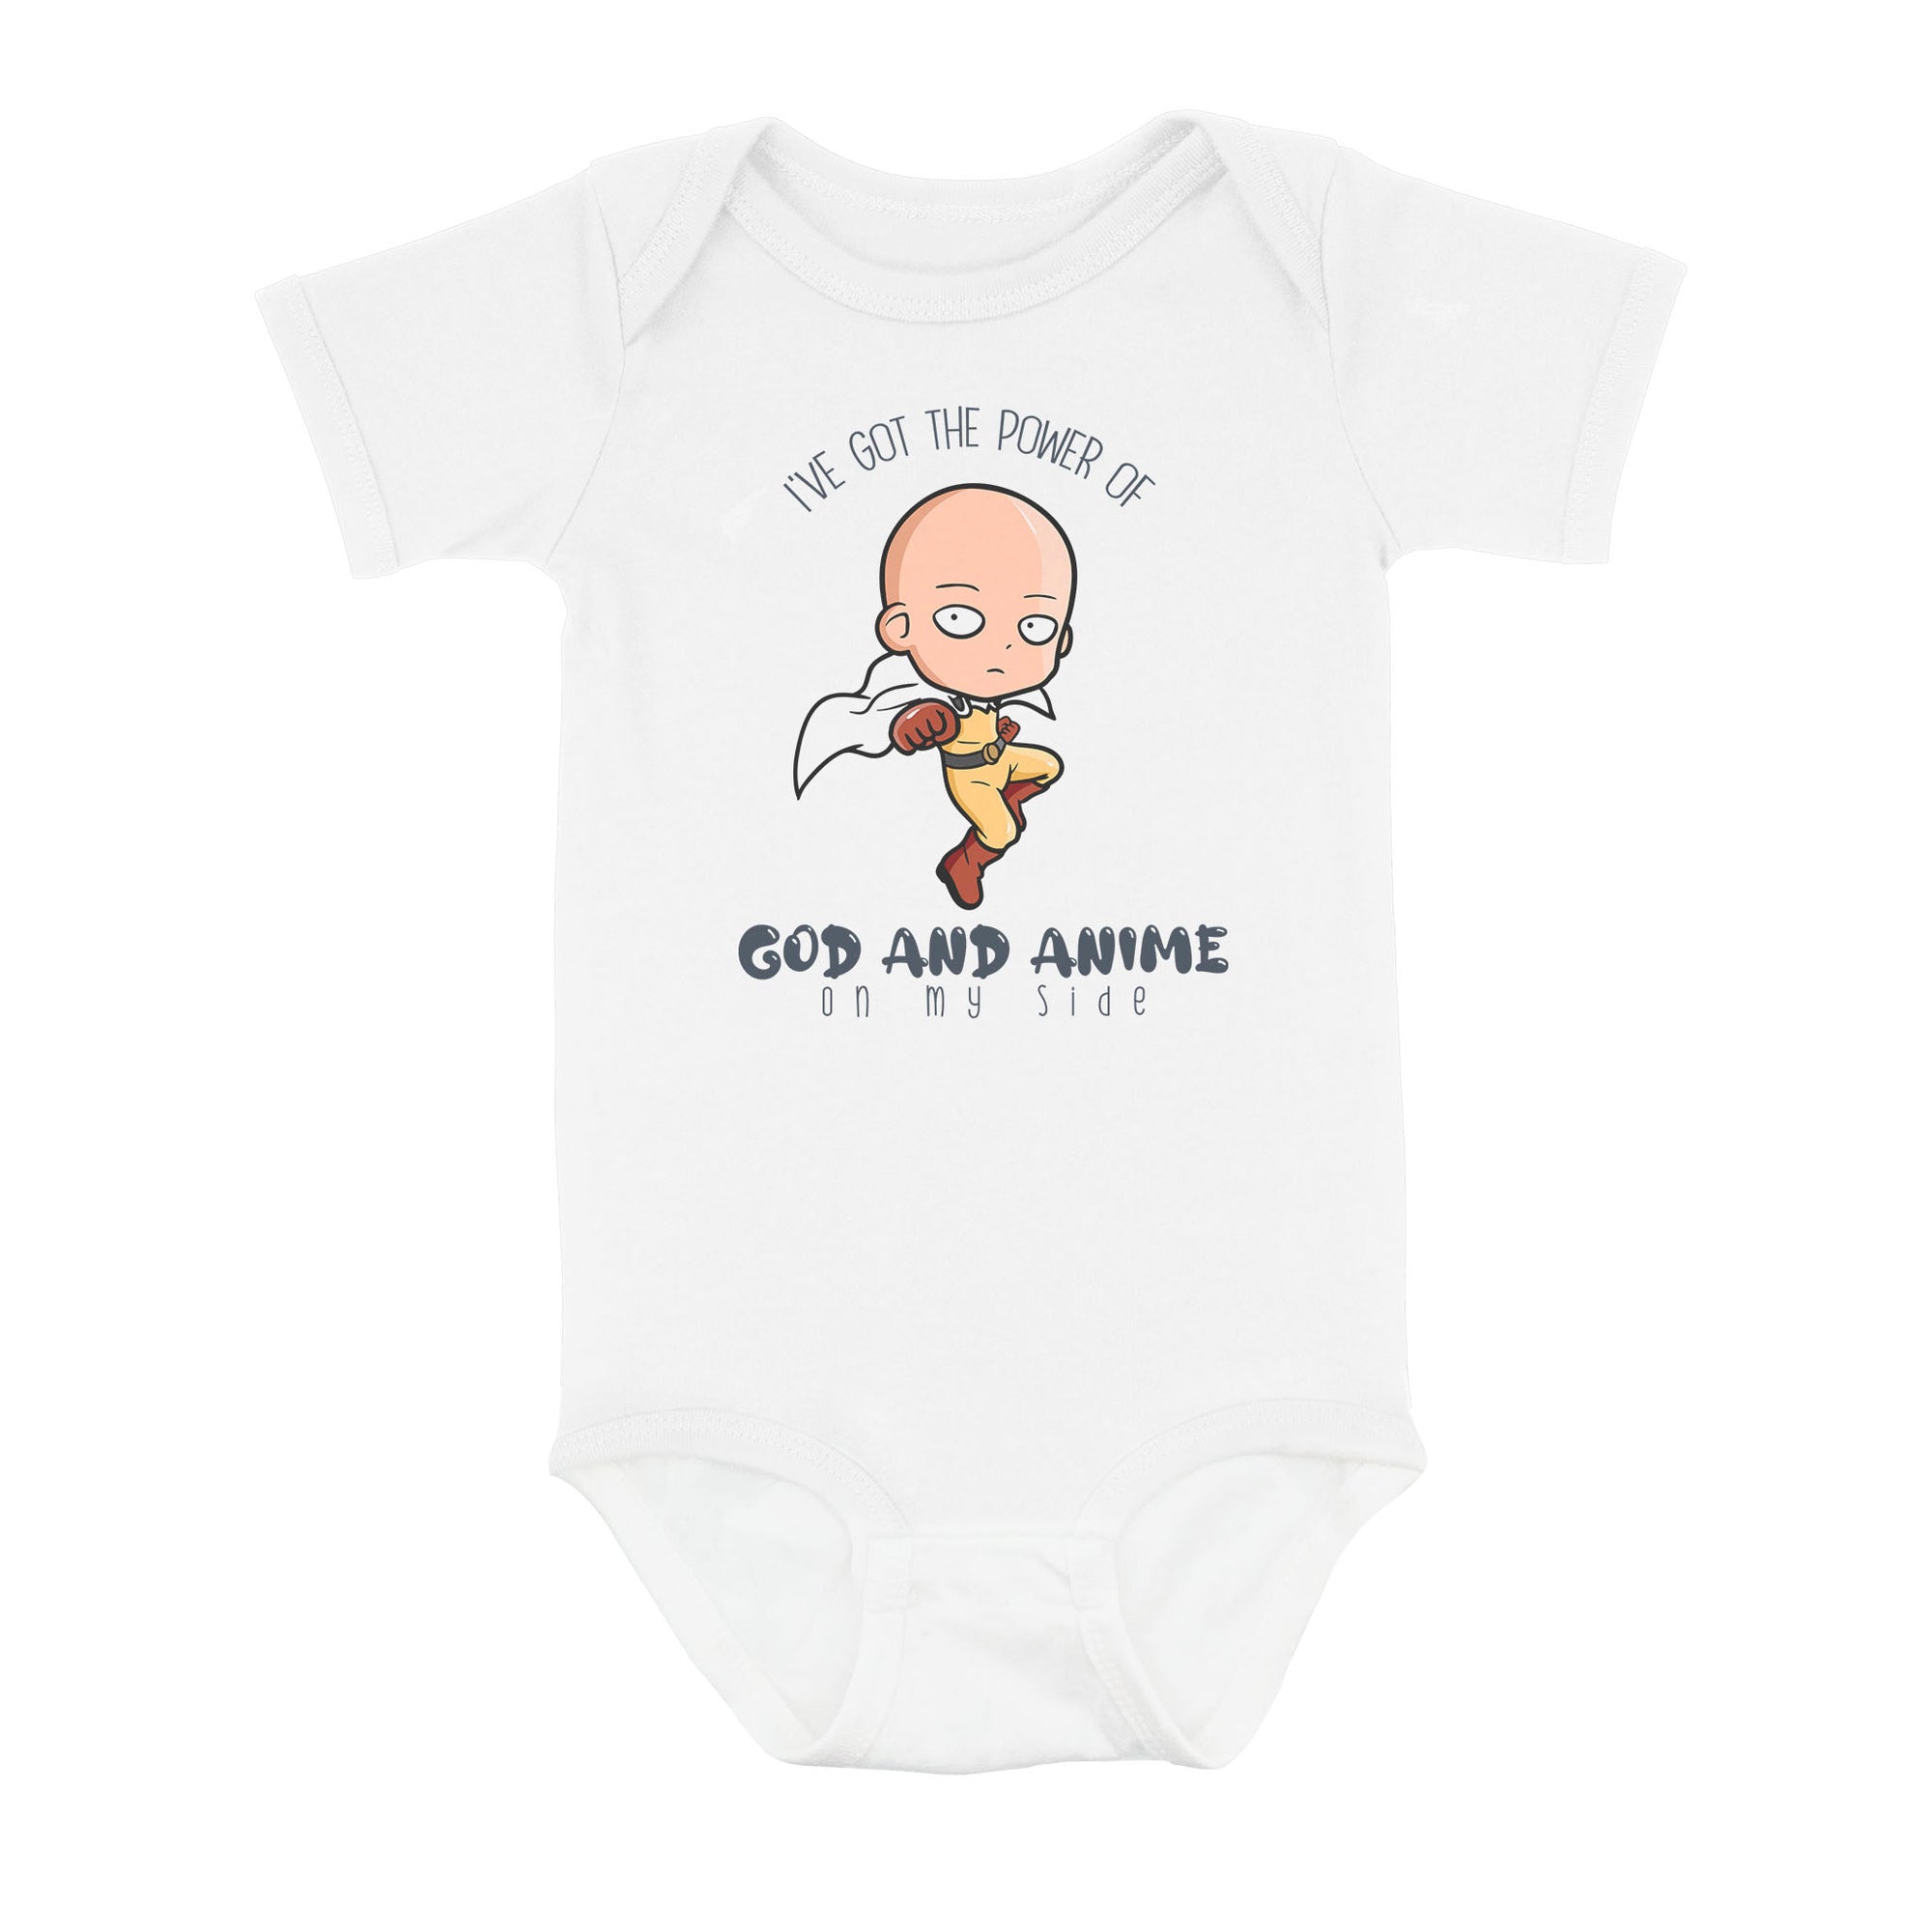 I Have The Power Of God And Anime On My Side - Baby Onesie